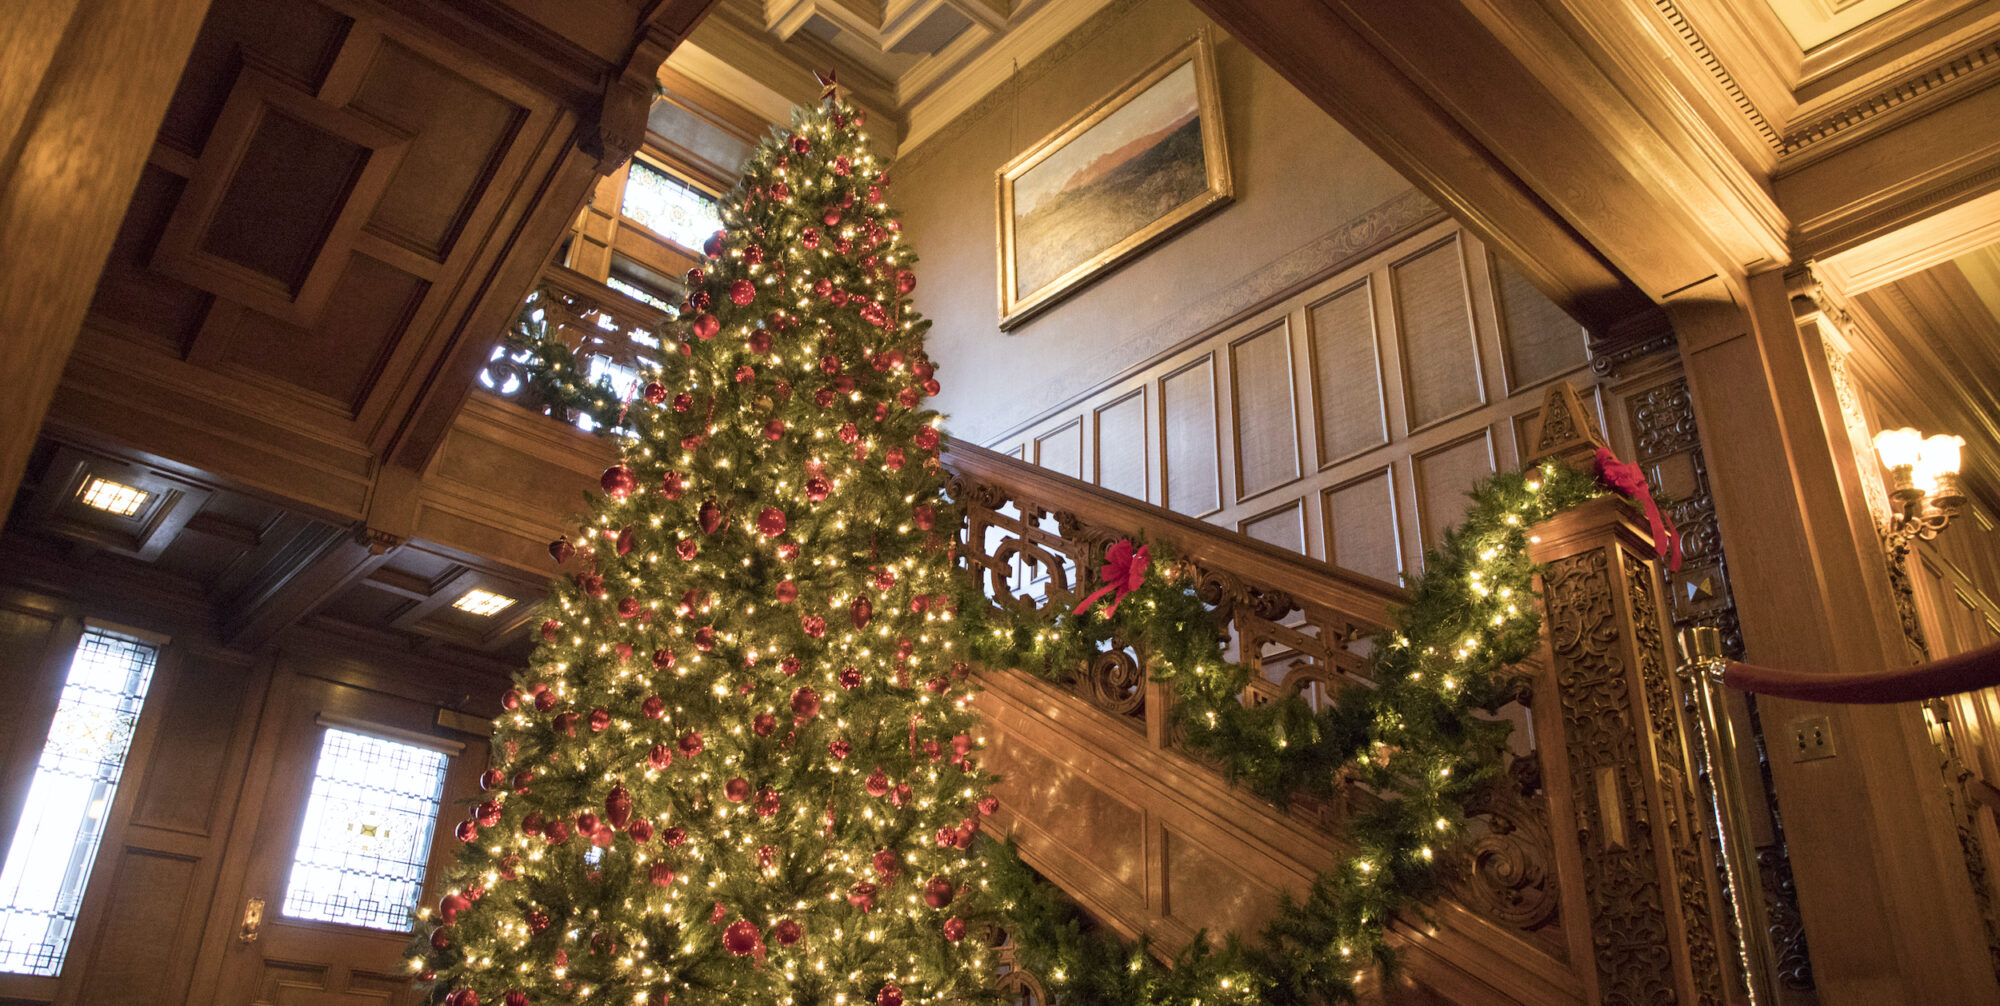 A tall Christmas tree lit with multi-color lights and ornaments stands in front of a wooden staircase and railing.